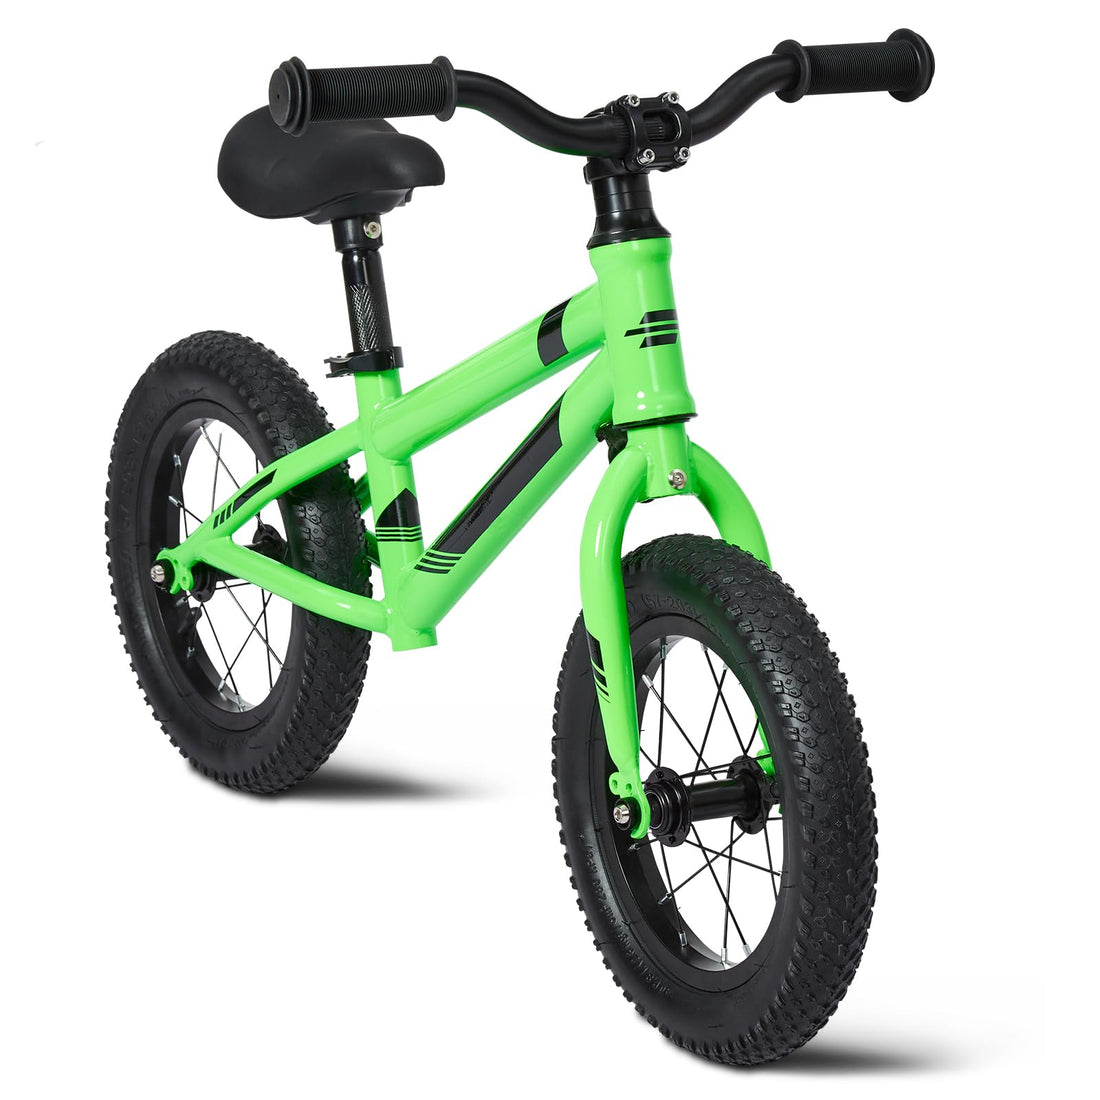 Balance Bike Lightweight Toddler Bike for 2, 3, 4, 5 and 6 Year Old Boys and Girls - No Pedal Bikes for Kids with Adjustable Handlebar and seat - Aluminium, EVA Tires - Training